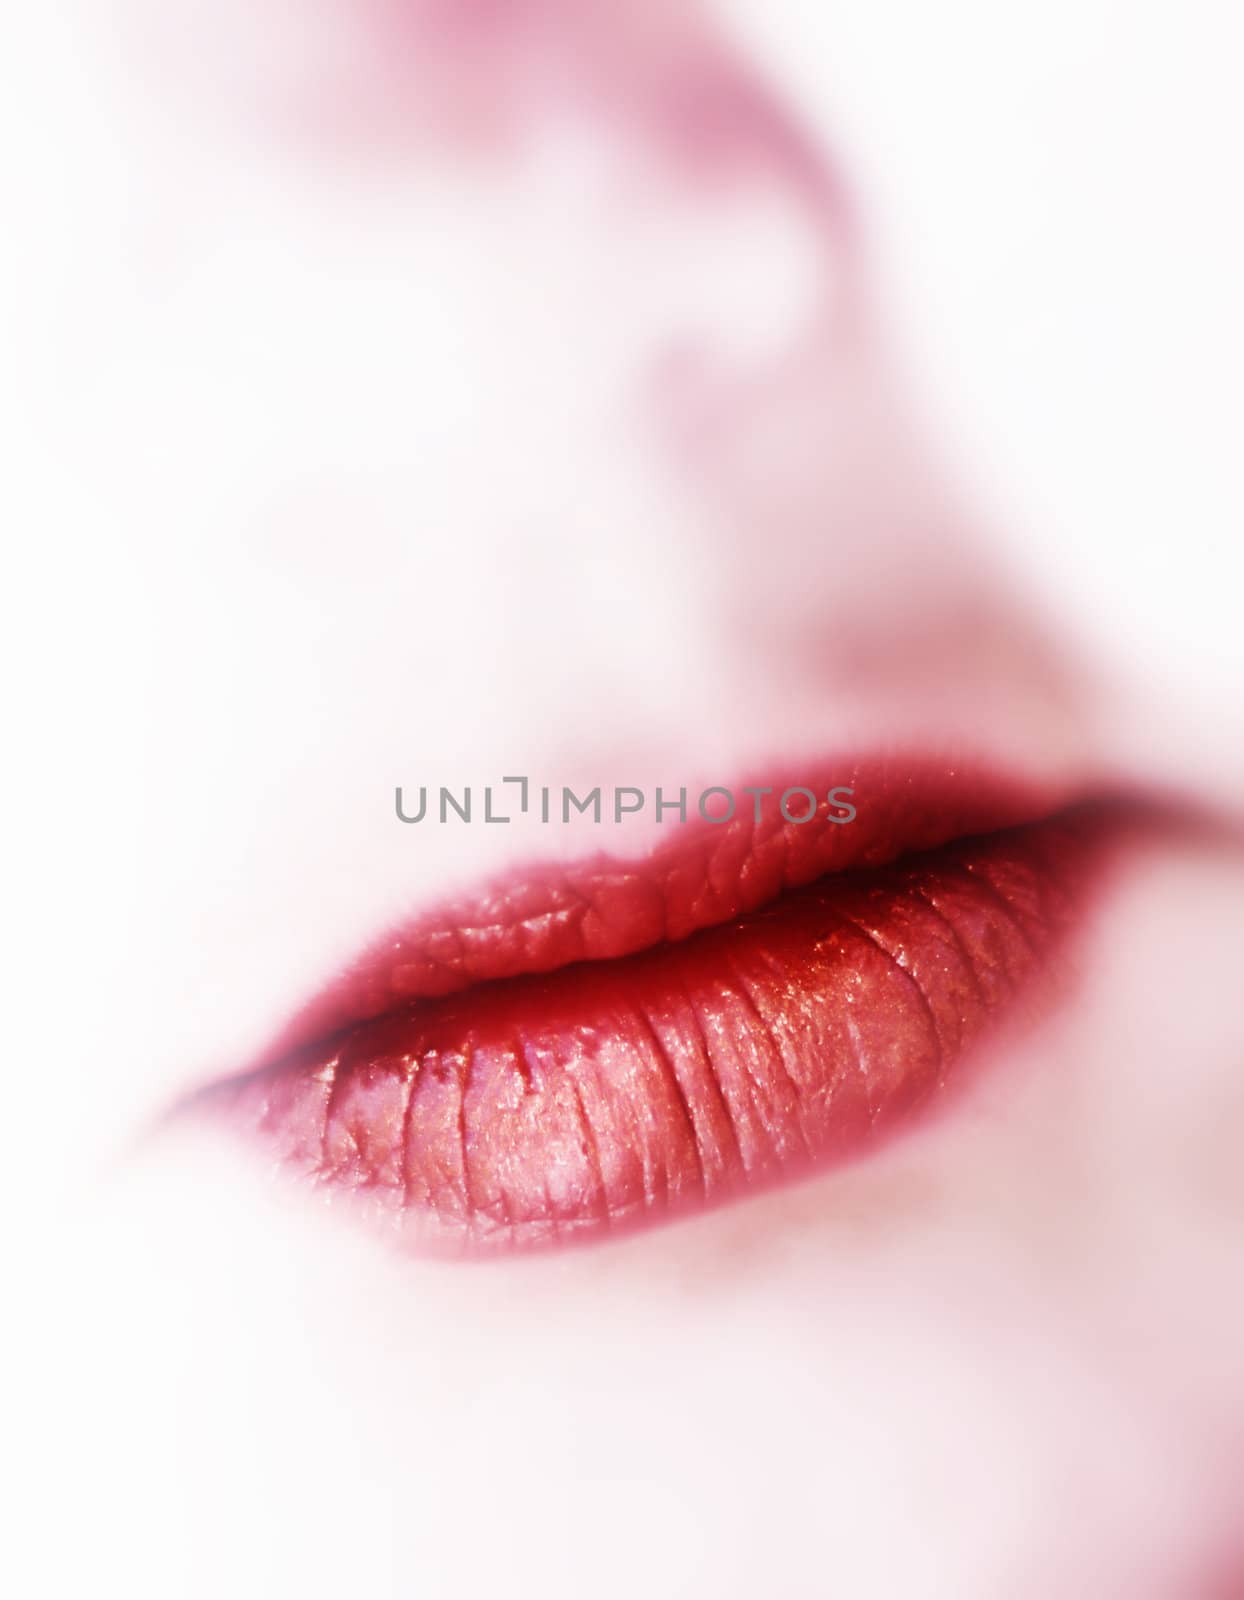 make-up colored red lips high key impression